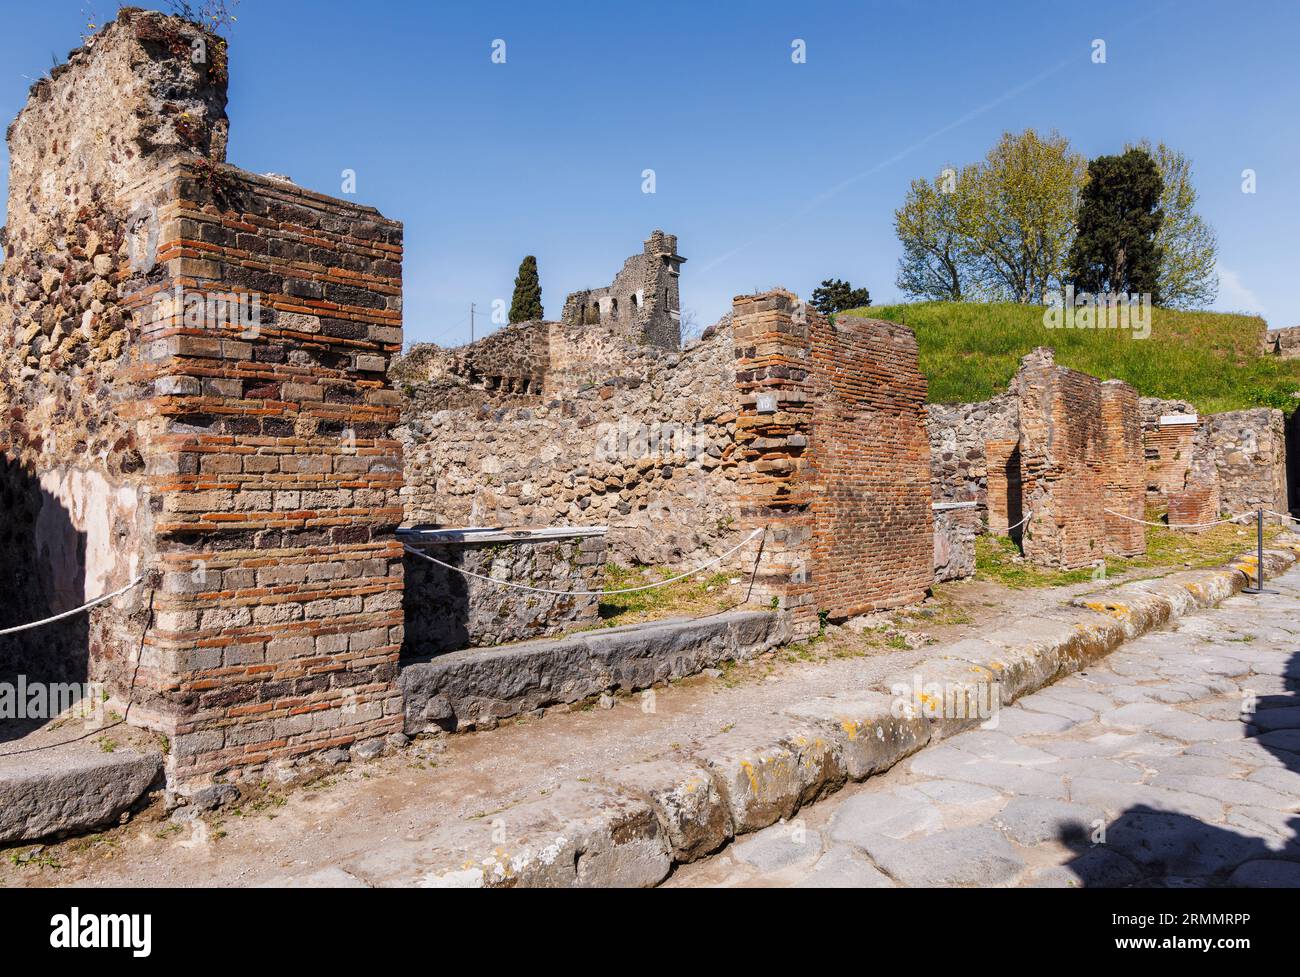 Pompeii Archaeological Site, Campania, Italy.  Excavated streets.  Pompeii, Herculaneum, and Torre Annunziata are collectively designated a UNESCO Wor Stock Photo